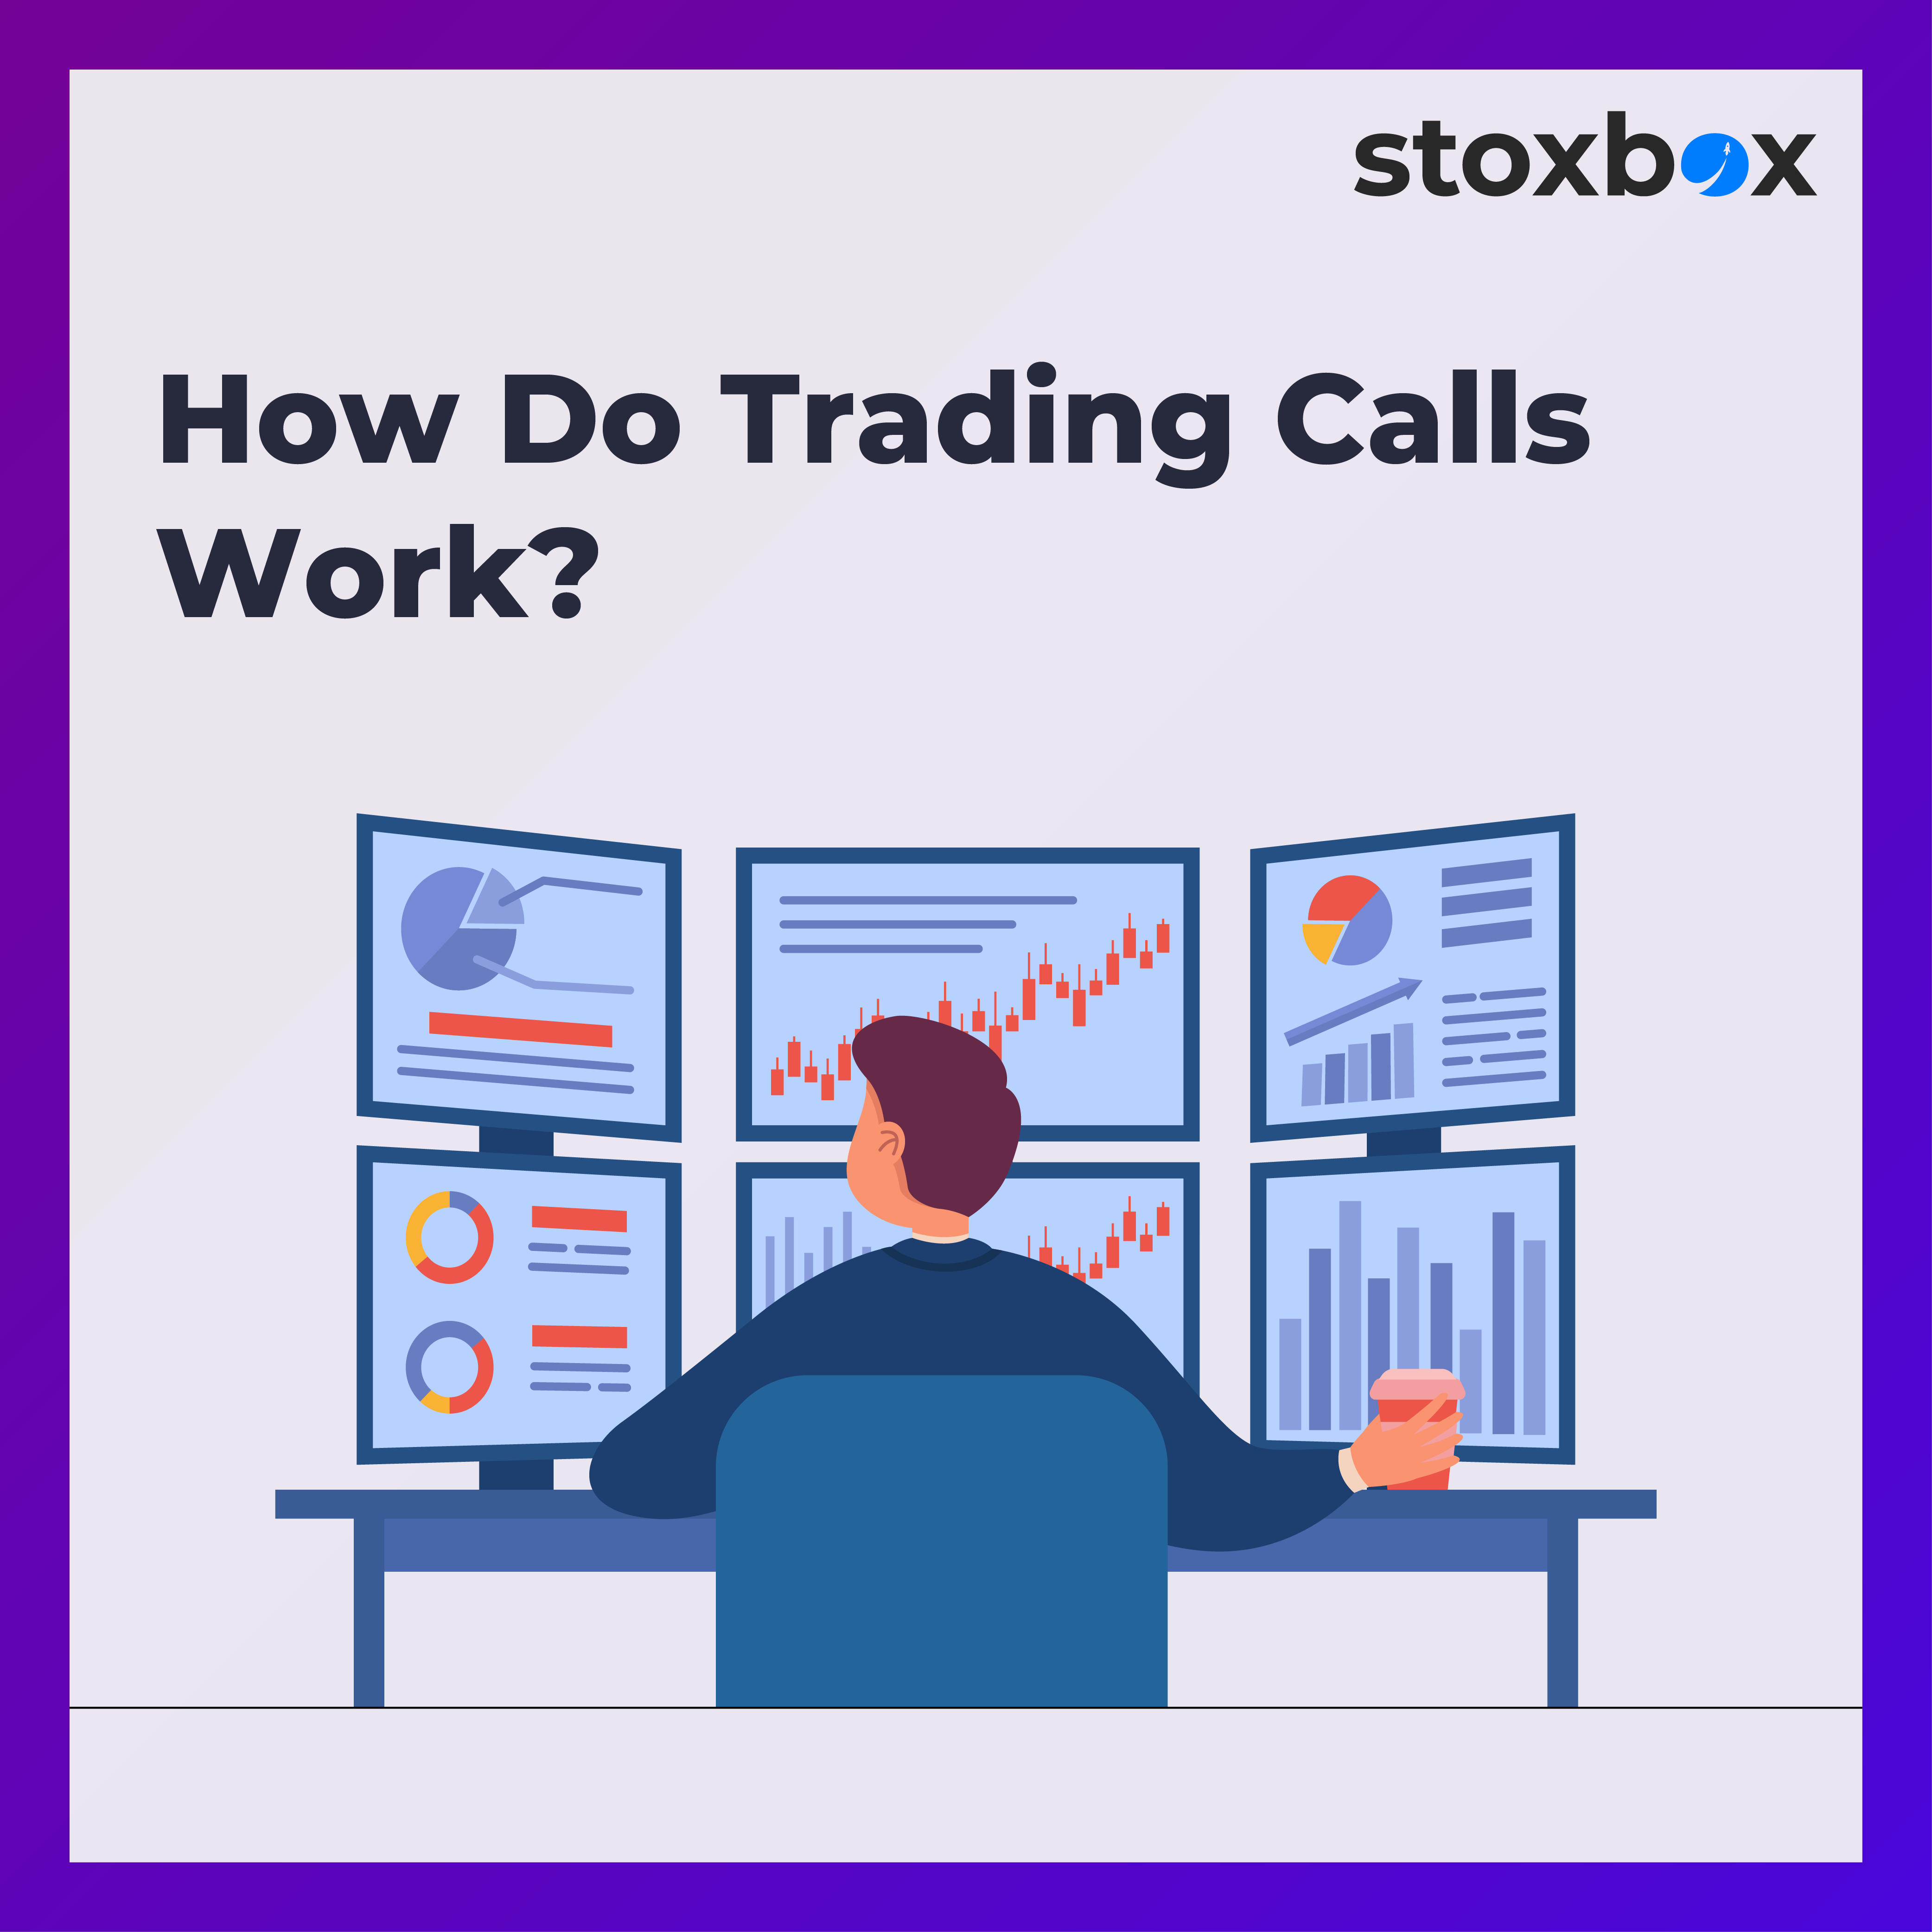 What Are Trading Calls and How Do They Work